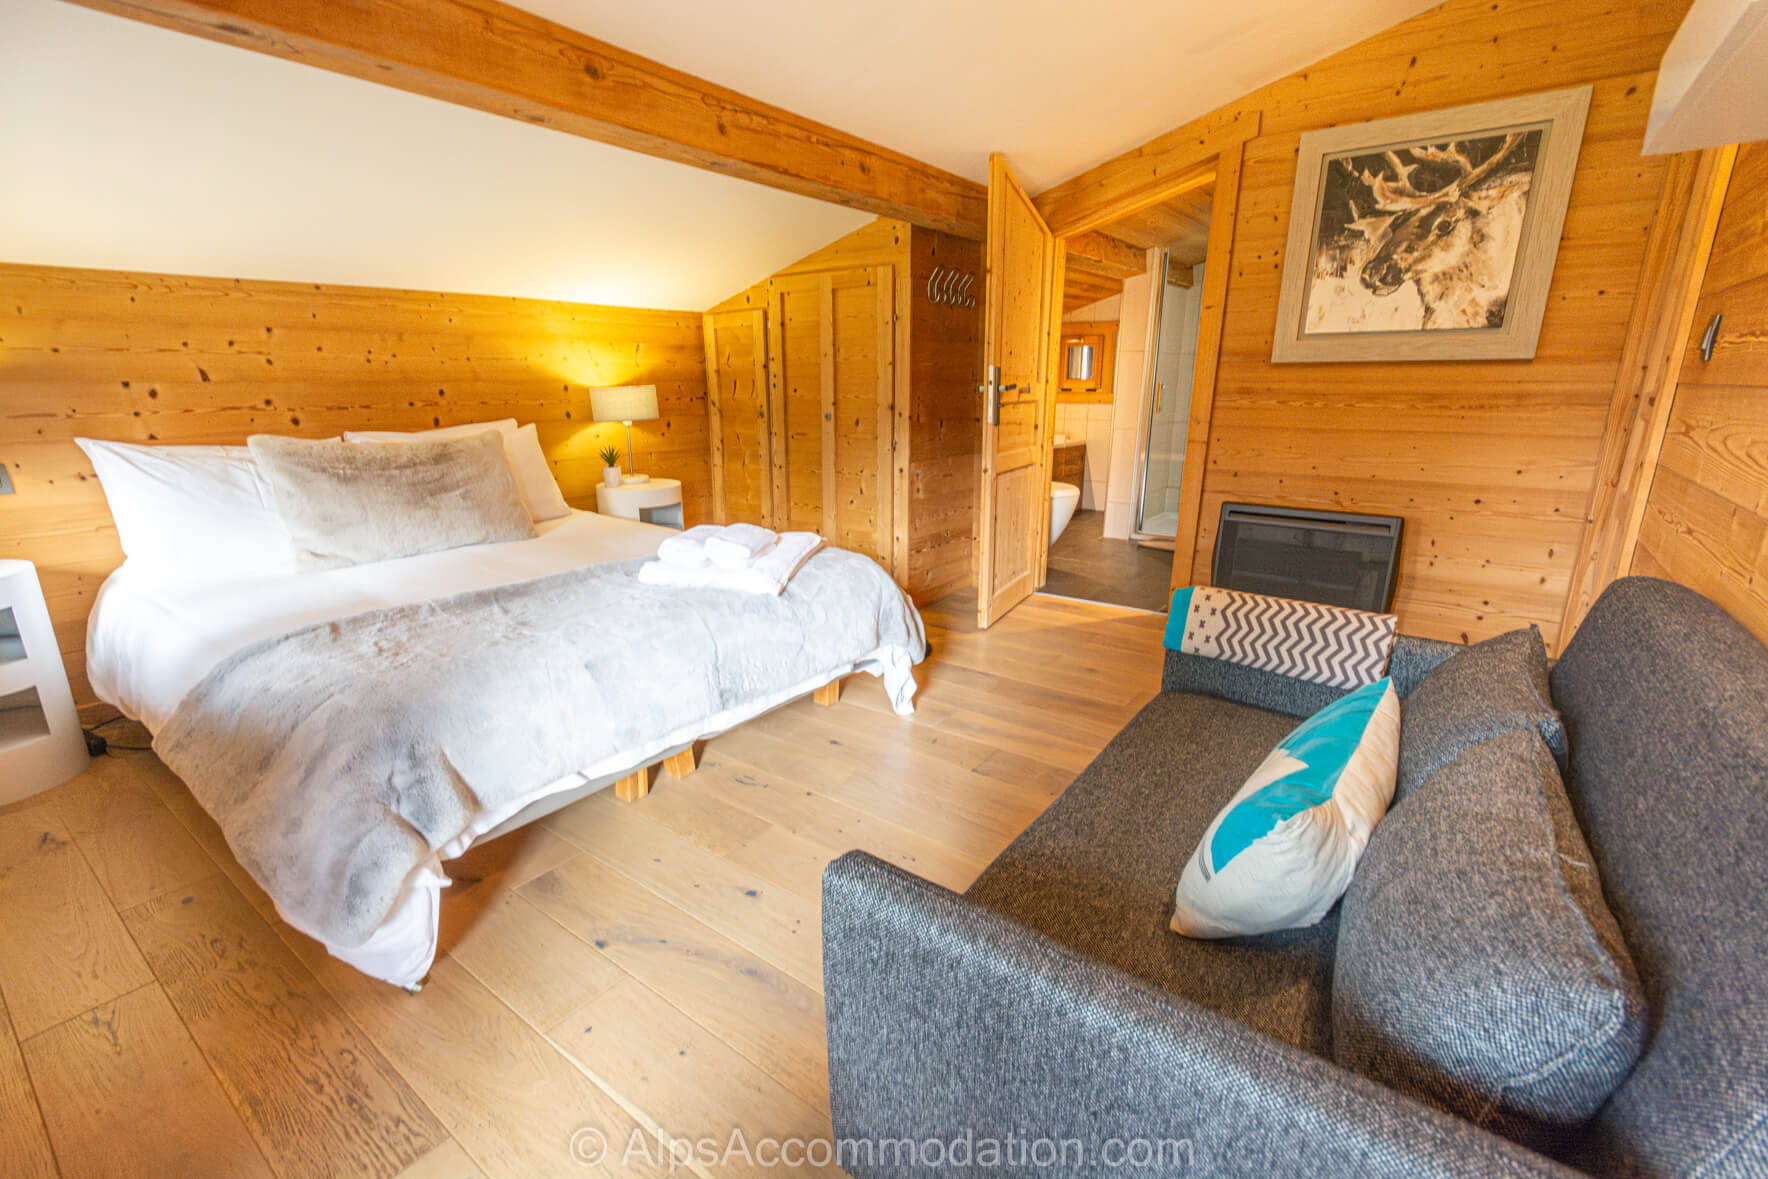 Chalet Toubkal Samoëns - King size bedroom with ensuite bathroom with complimentary Molton Brown toiletries